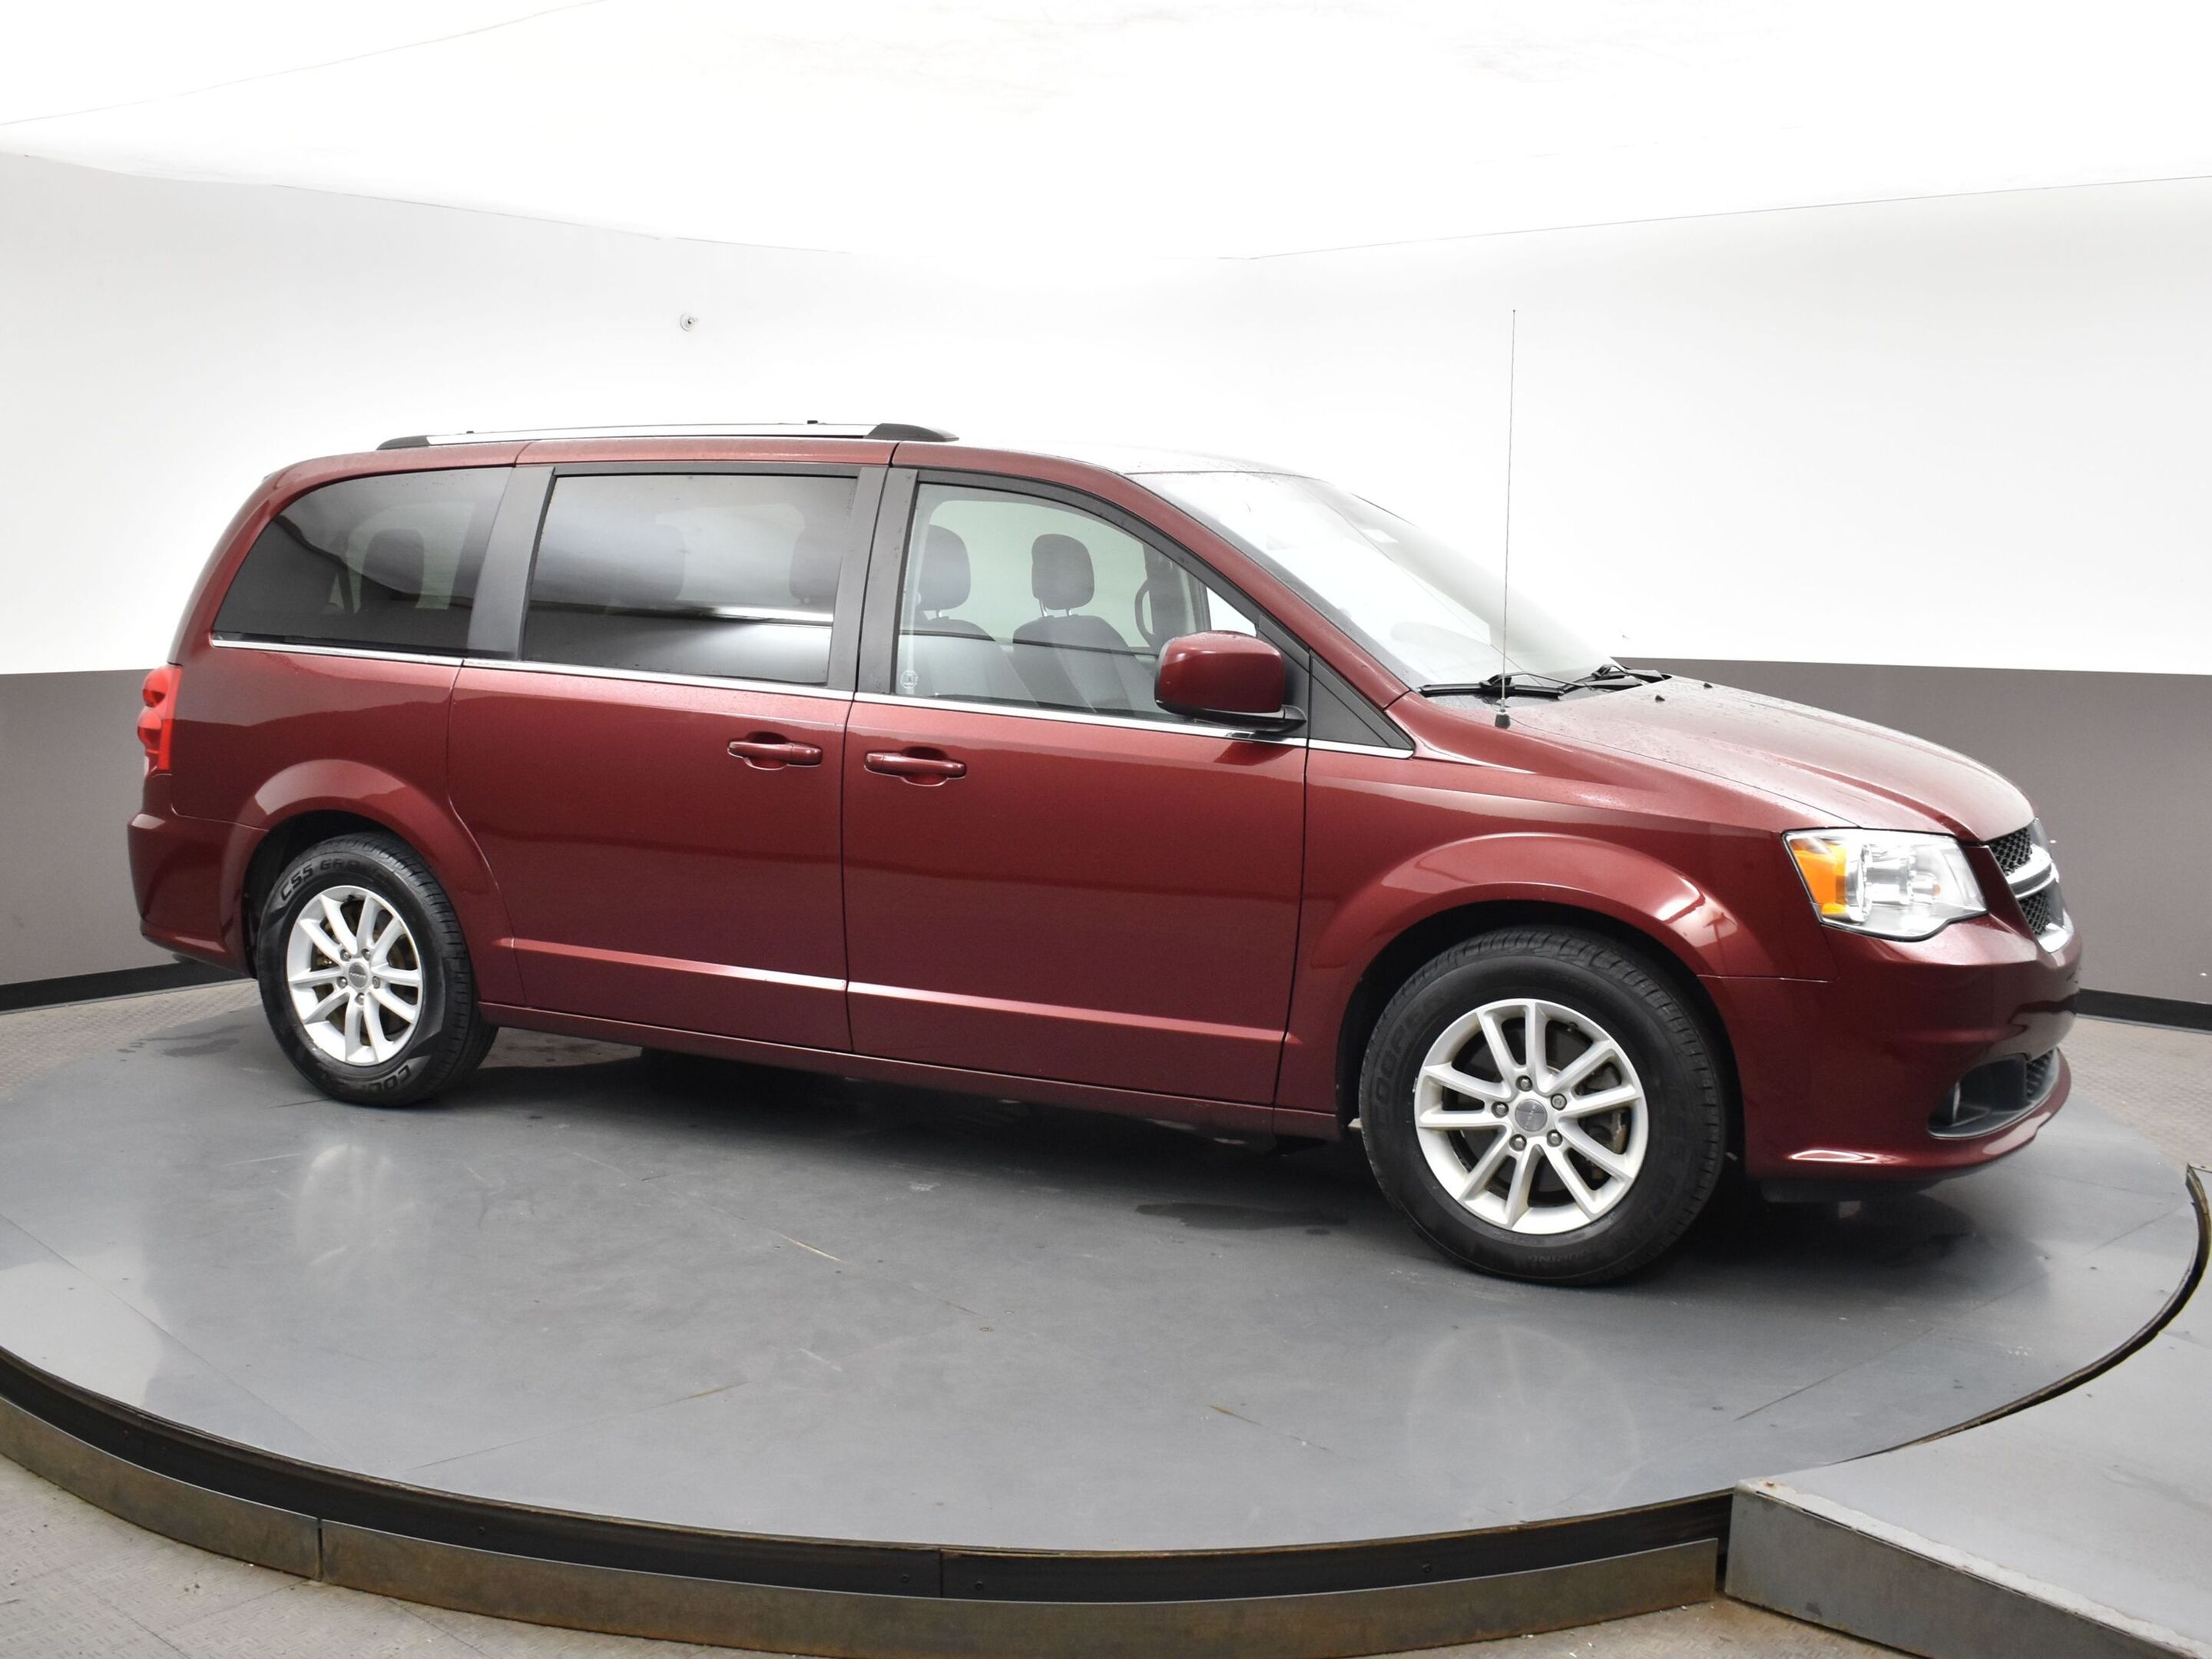 2019 Dodge Grand Caravan SXT - Call 902-469-8484 To Book Appointment! Lease